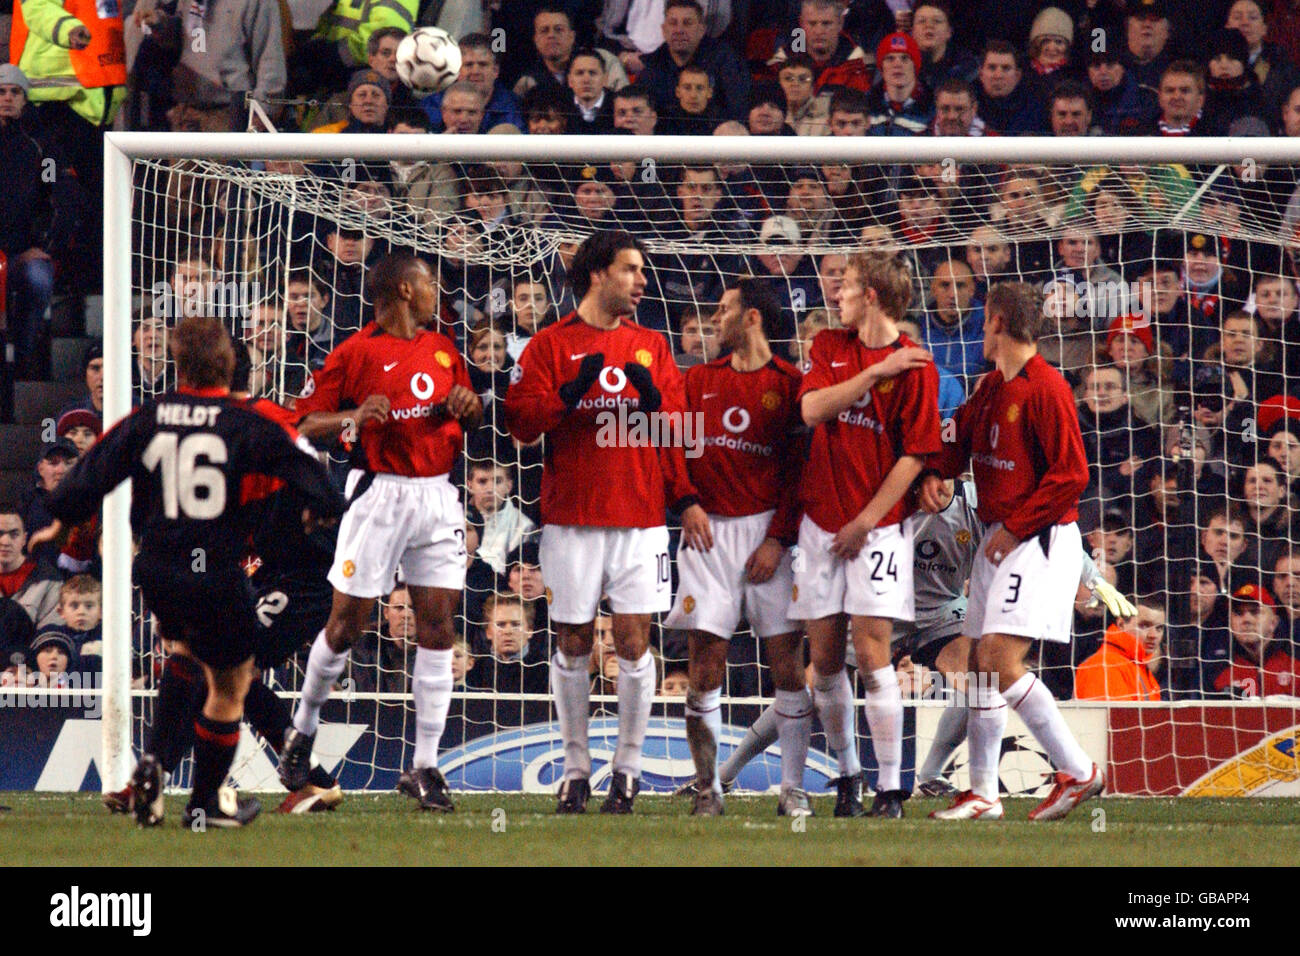 VFB Stuttgart's Horst Heldt combines with teammate Kevin Kuranyi (hidden) to take a free kick past Manchester United's dumbstruck defensive wall of (l-r) Quinton Fortune, Ruud van Nistelrooy, Ryan Giggs, Darren Fletcher and Phil Neville Stock Photo